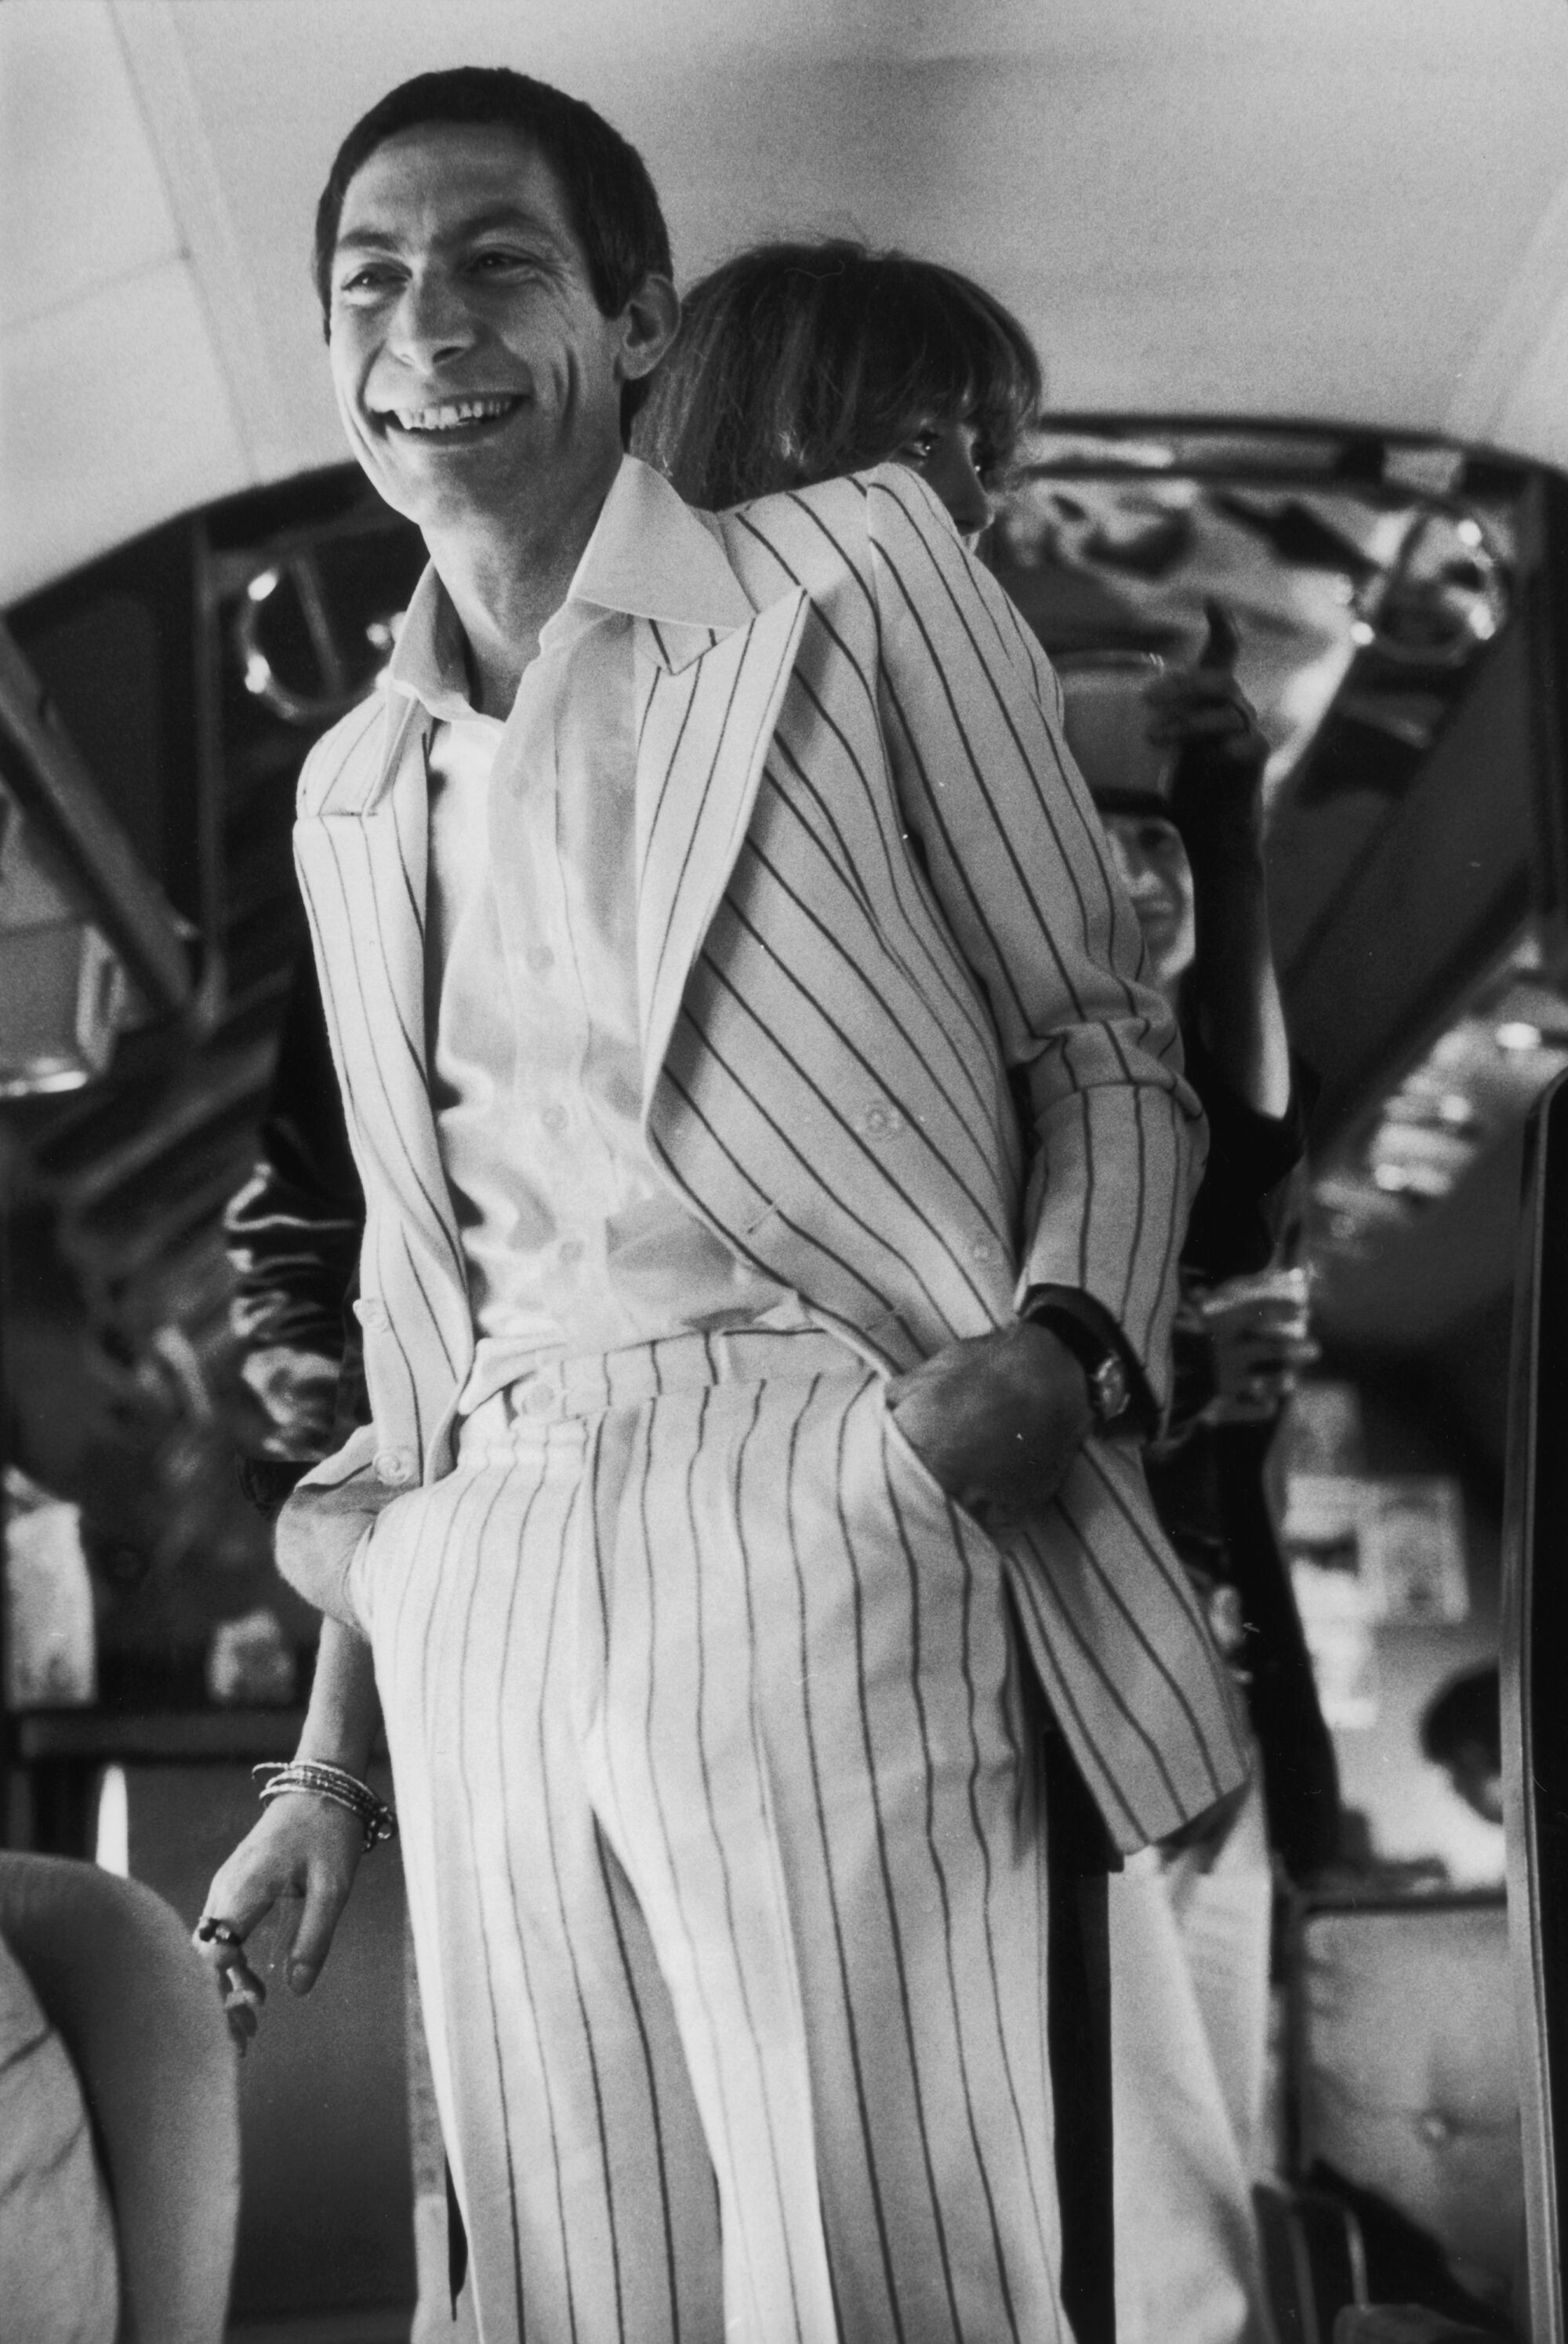 A black-and-white photo of Rolling Stones drummer Charlie Watts in a striped suit.